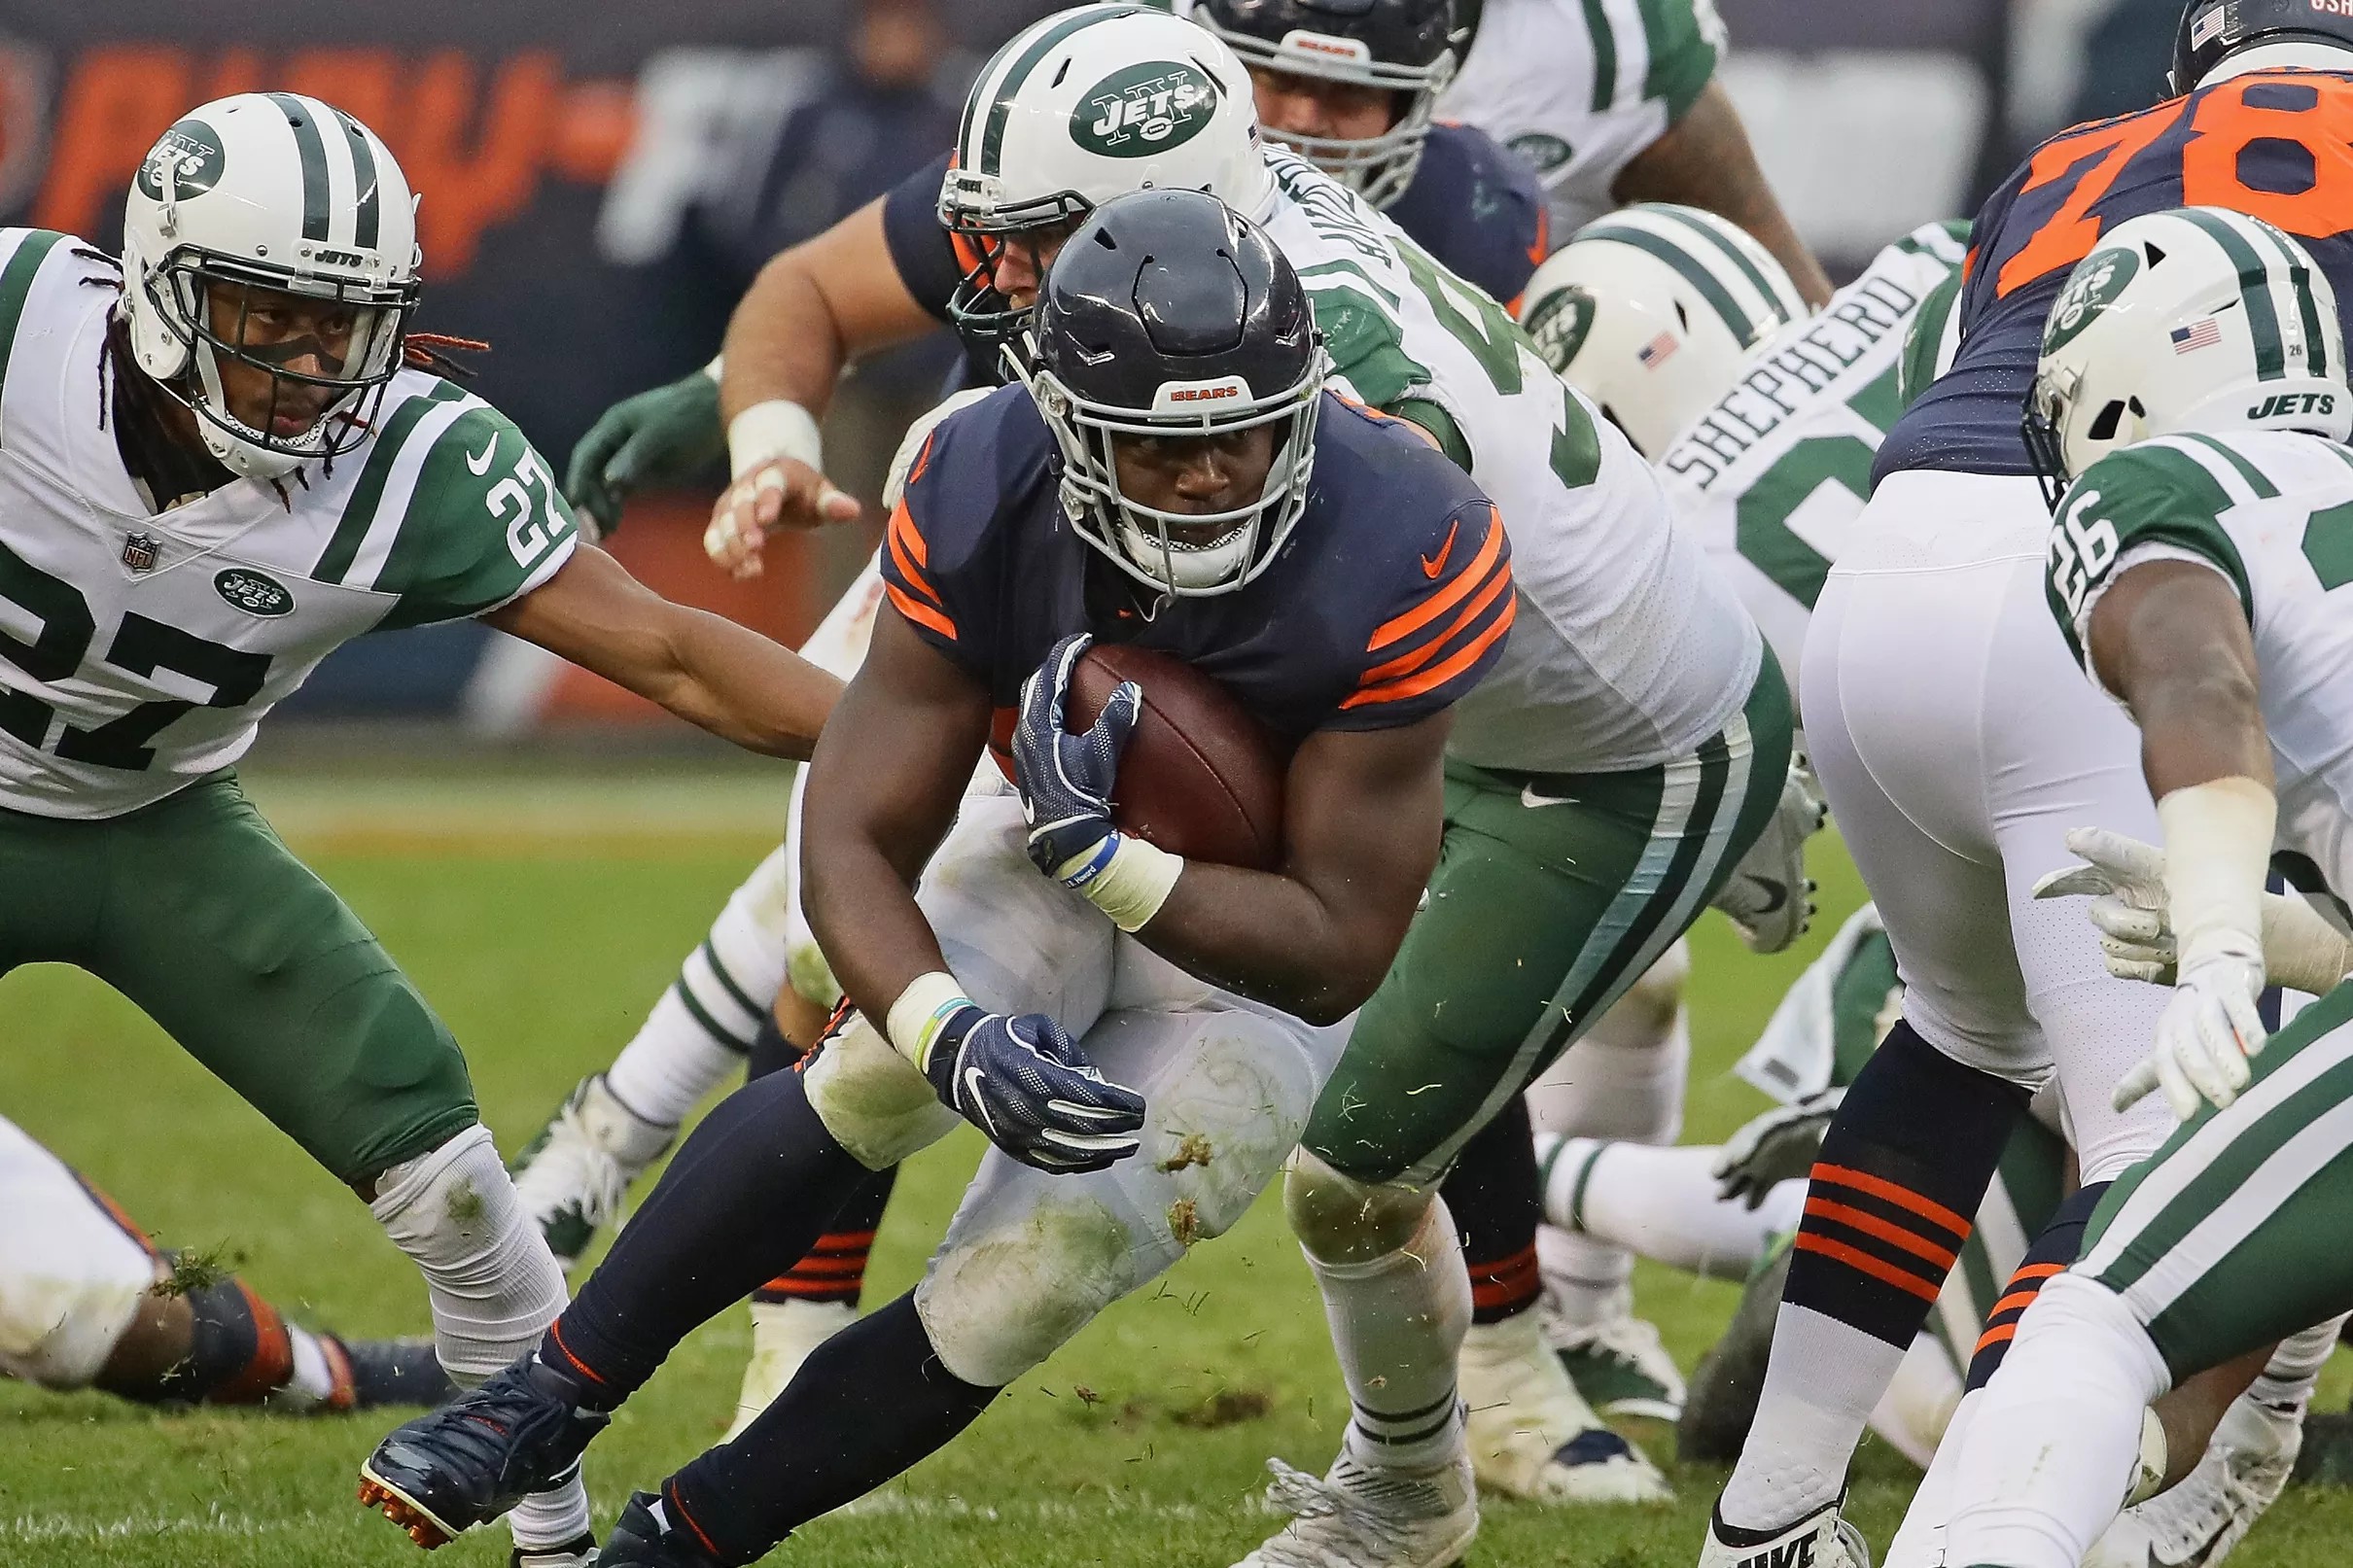 Bears vs. Jets Snap counts, stats, and more